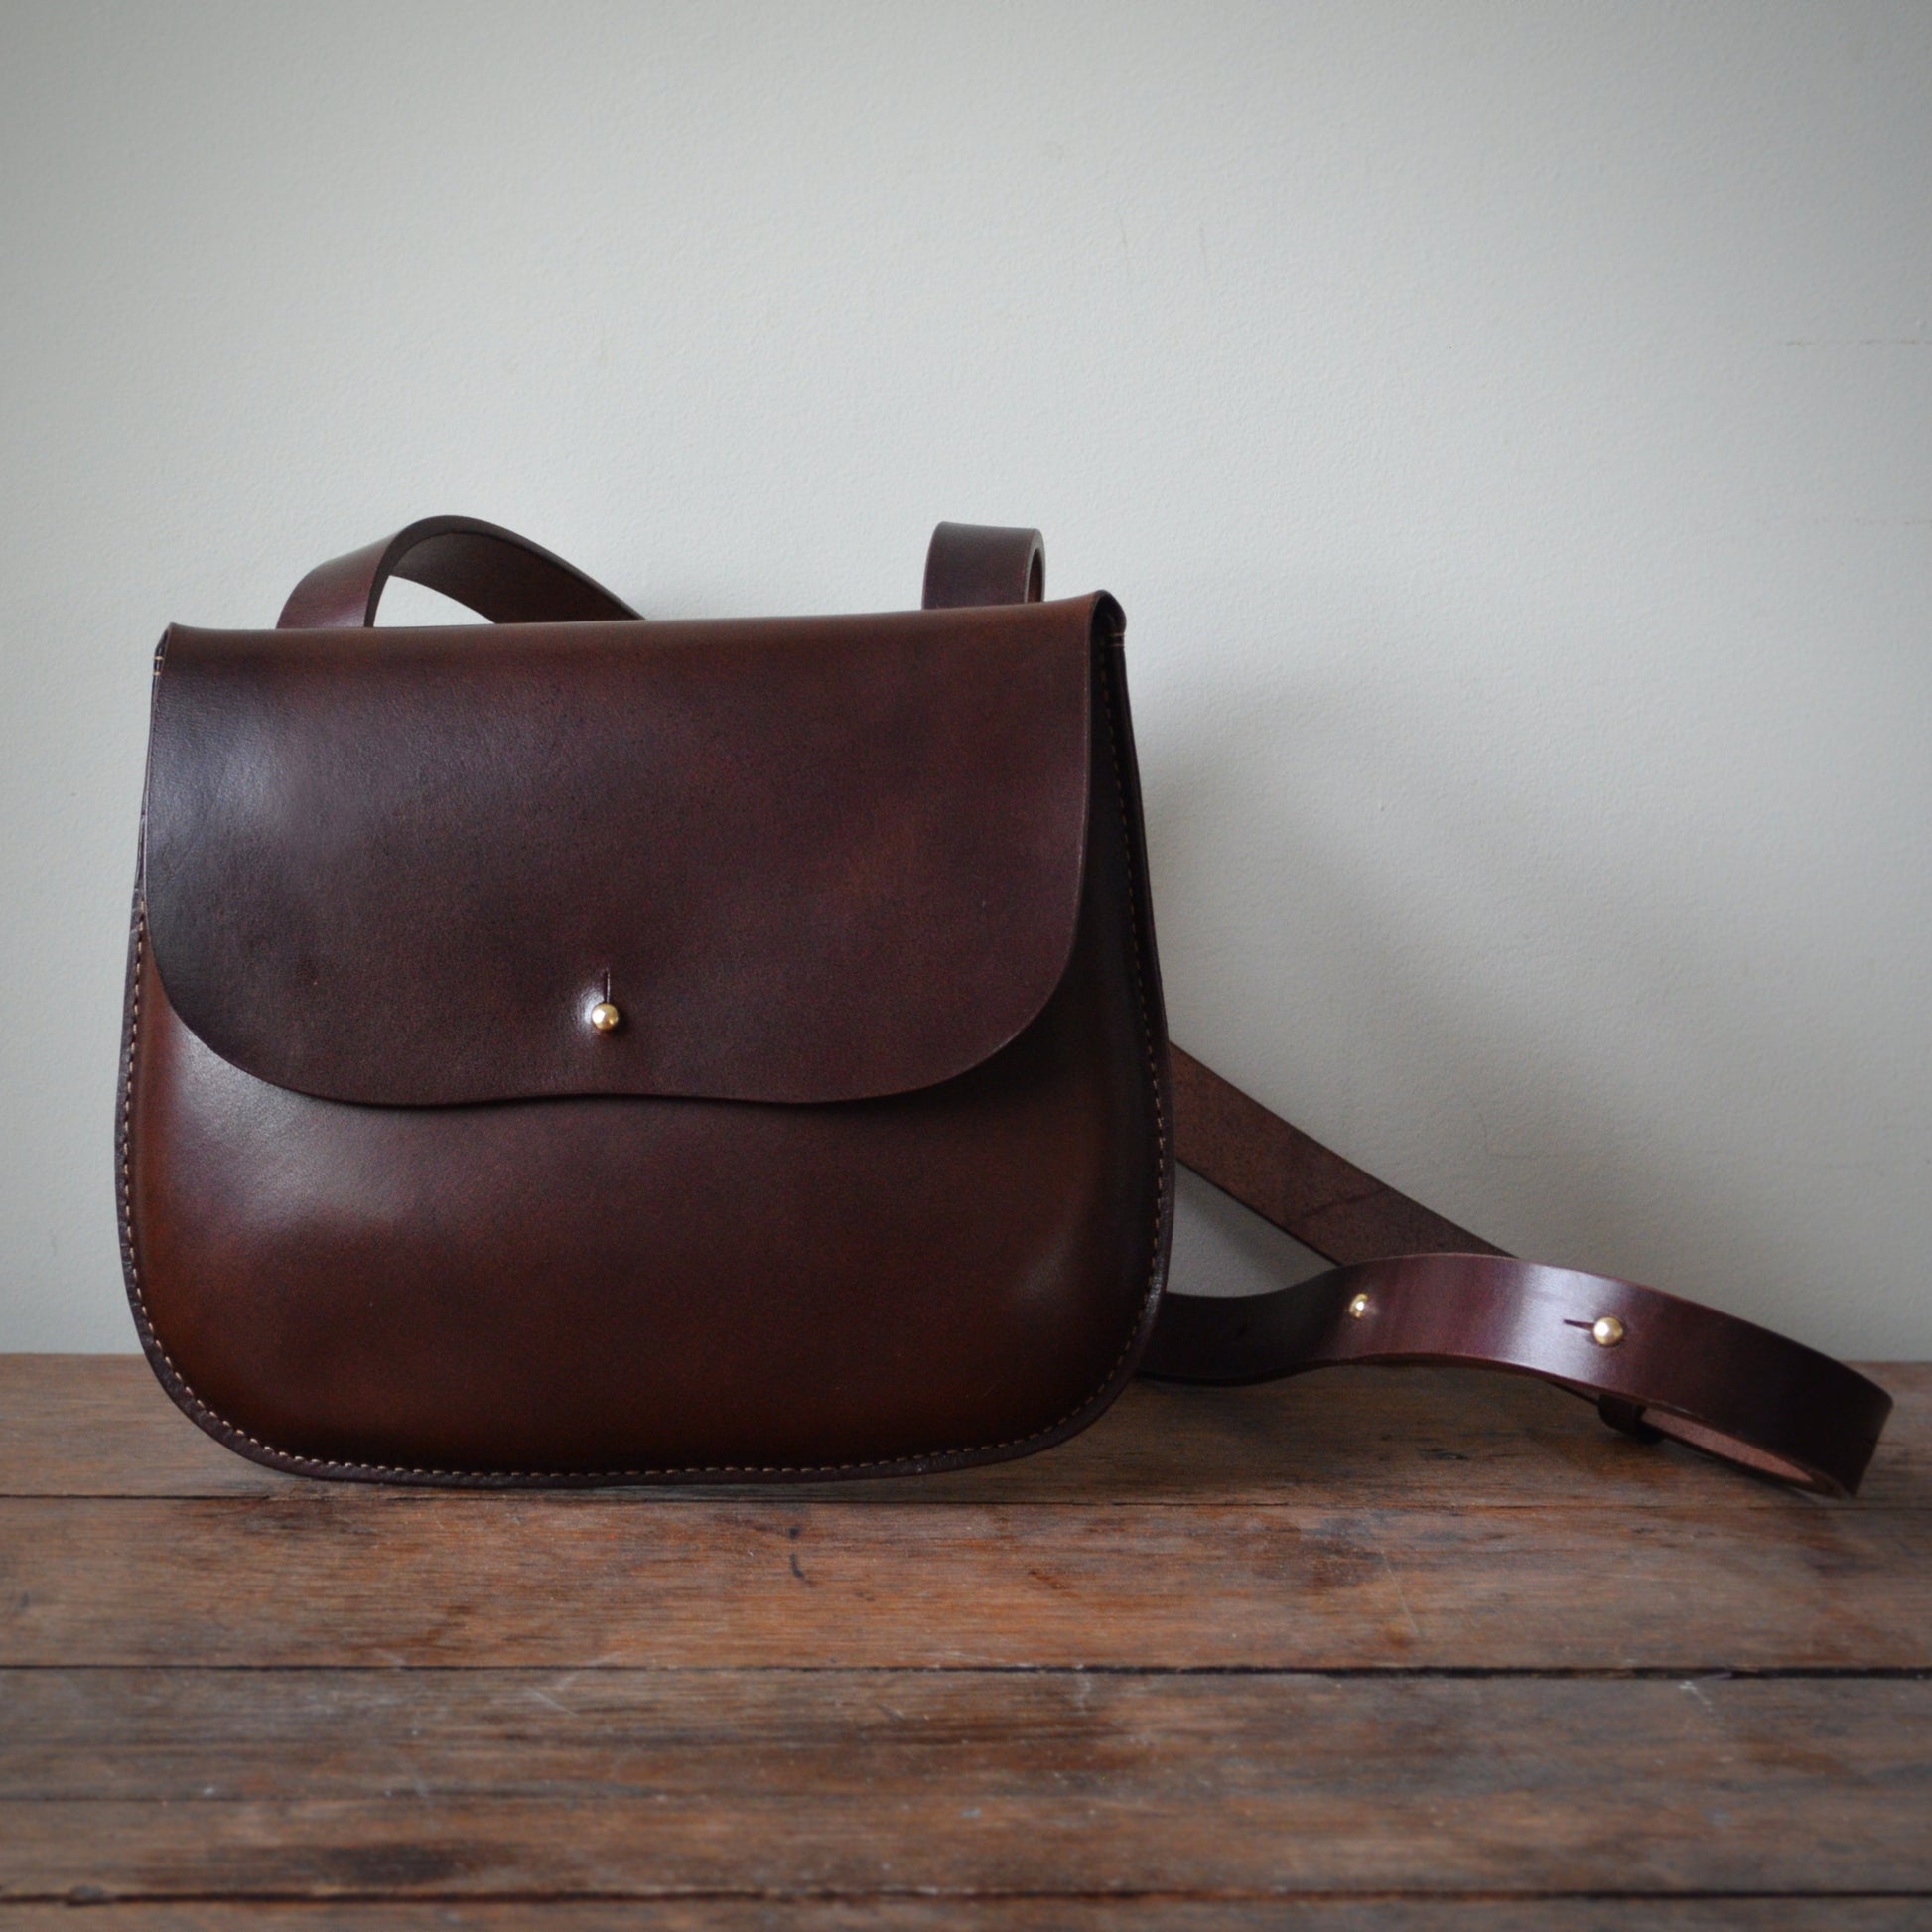 A dark brown crossbody bag sits on stands on a wood plank surface against a wall.